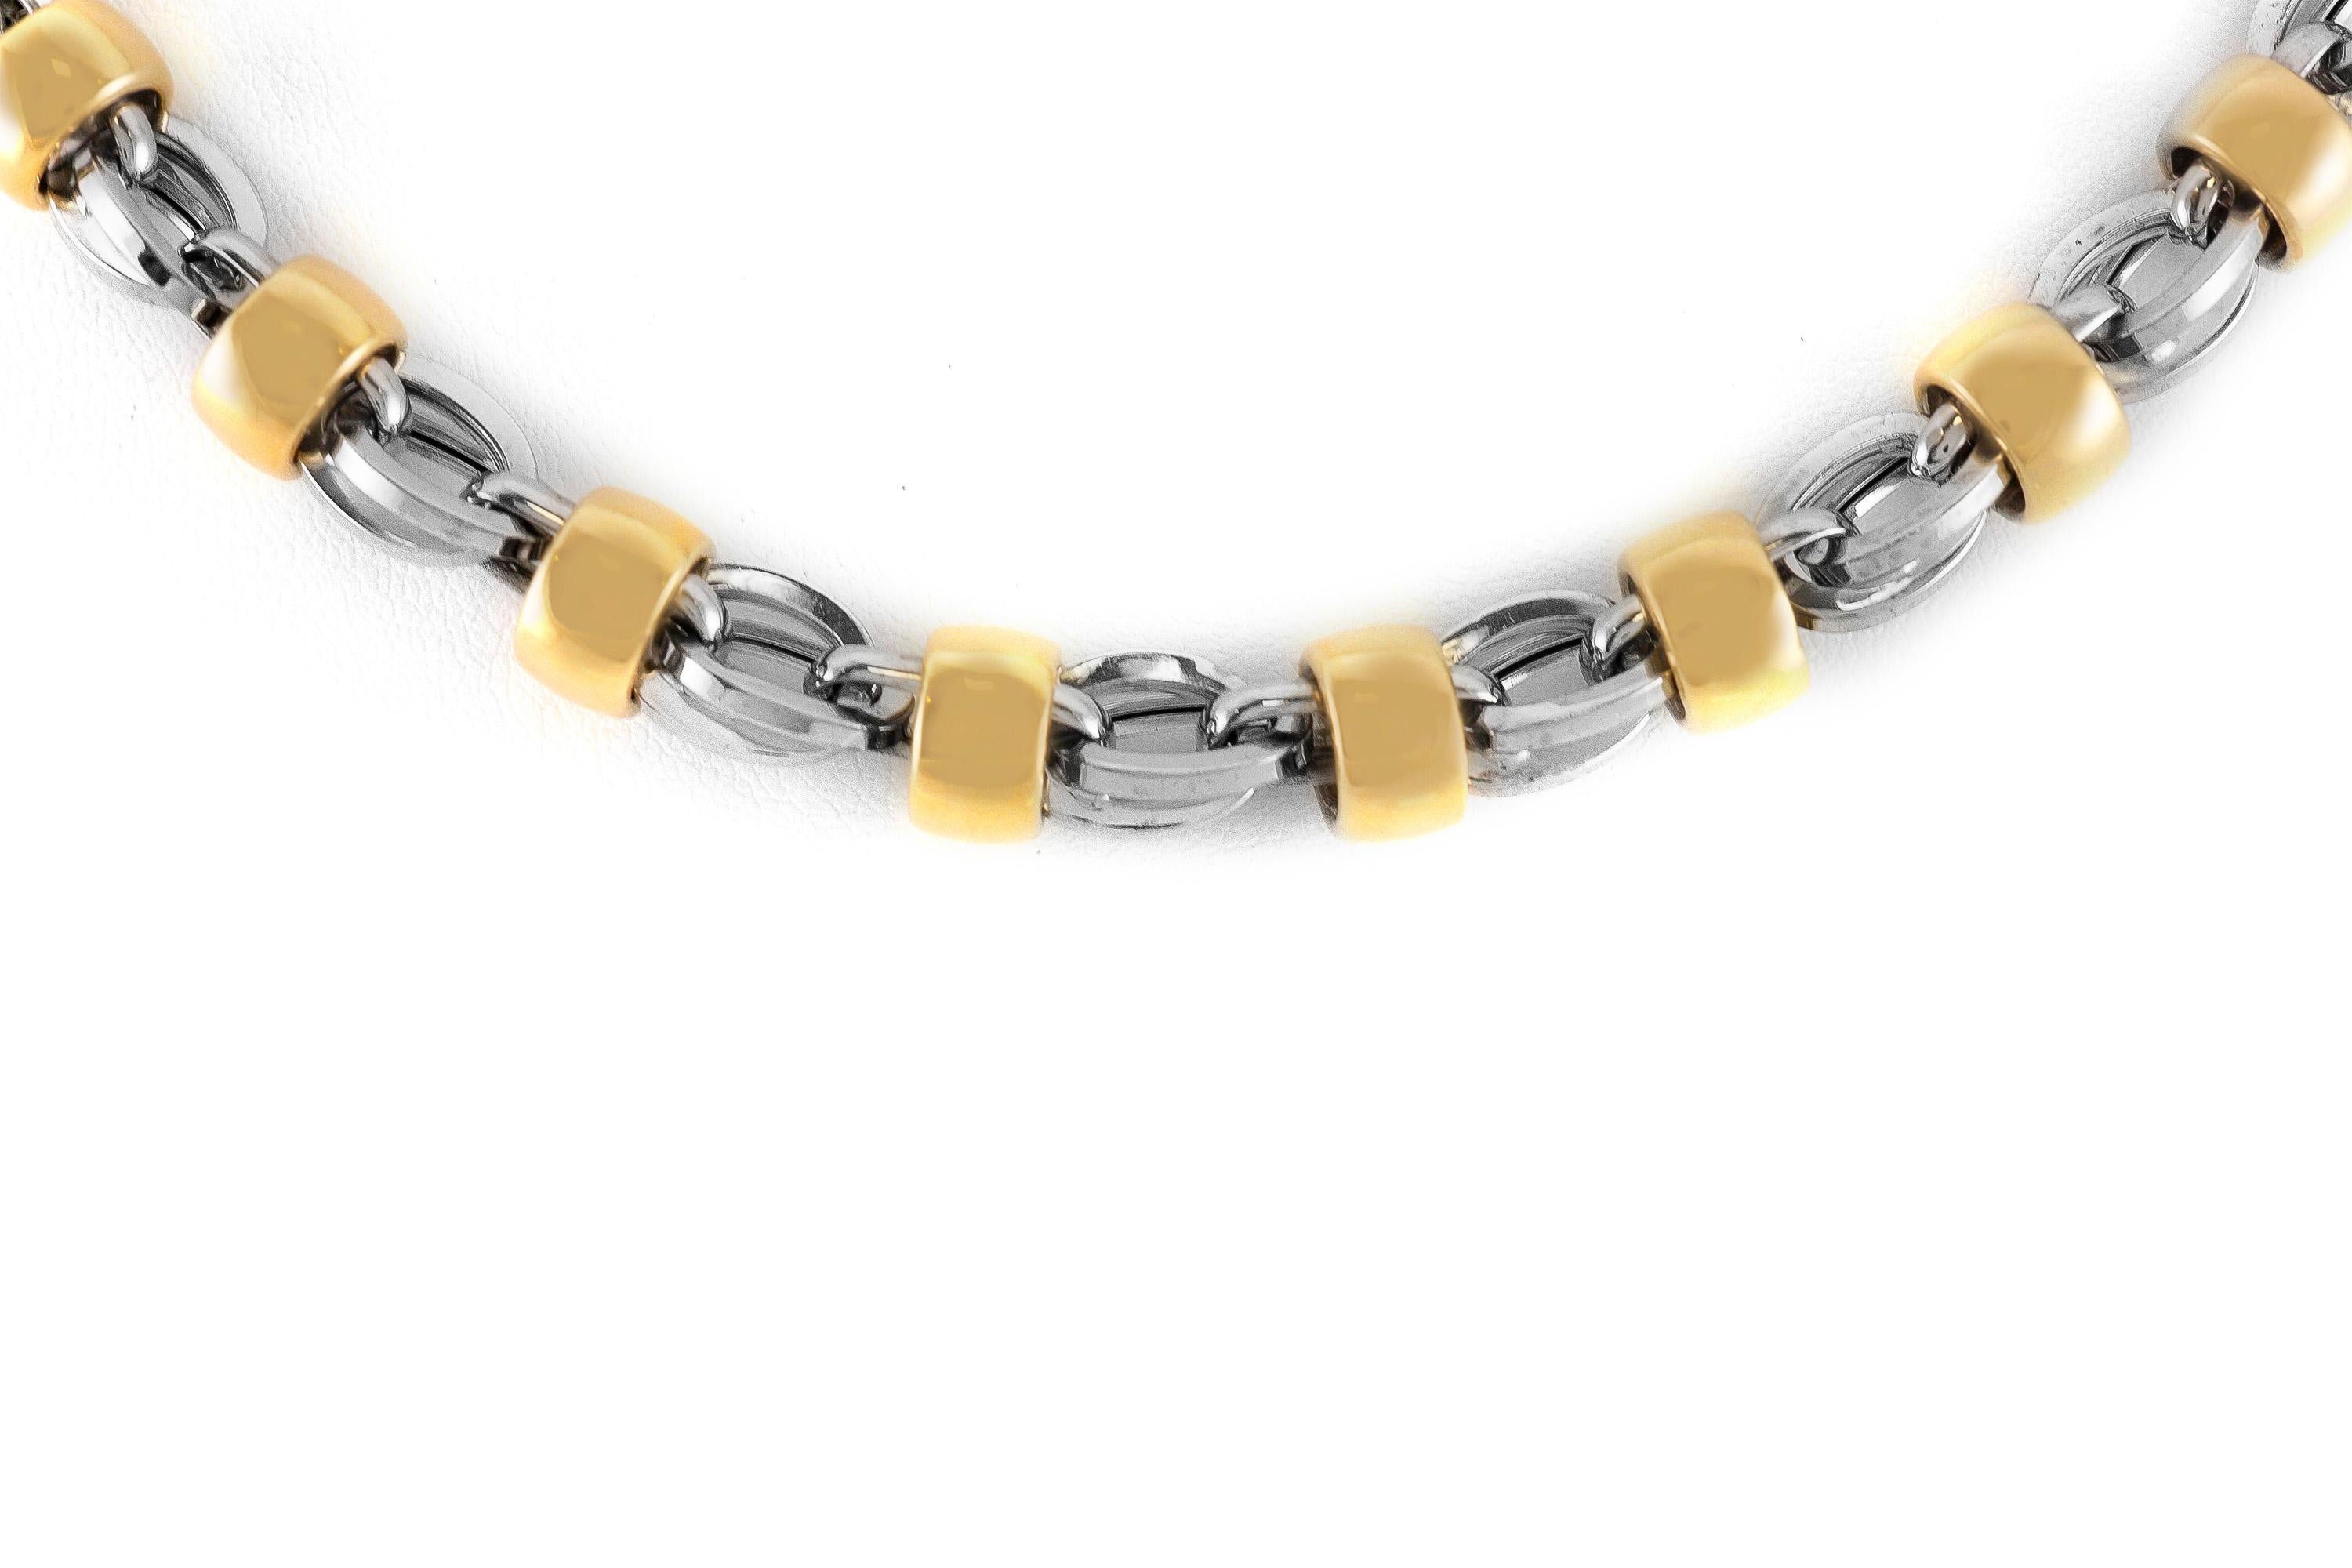 Necklace finely crafted in 18 karat yellow gold, 17 inches long, weighing 29.1 dwt. Circa 1980.